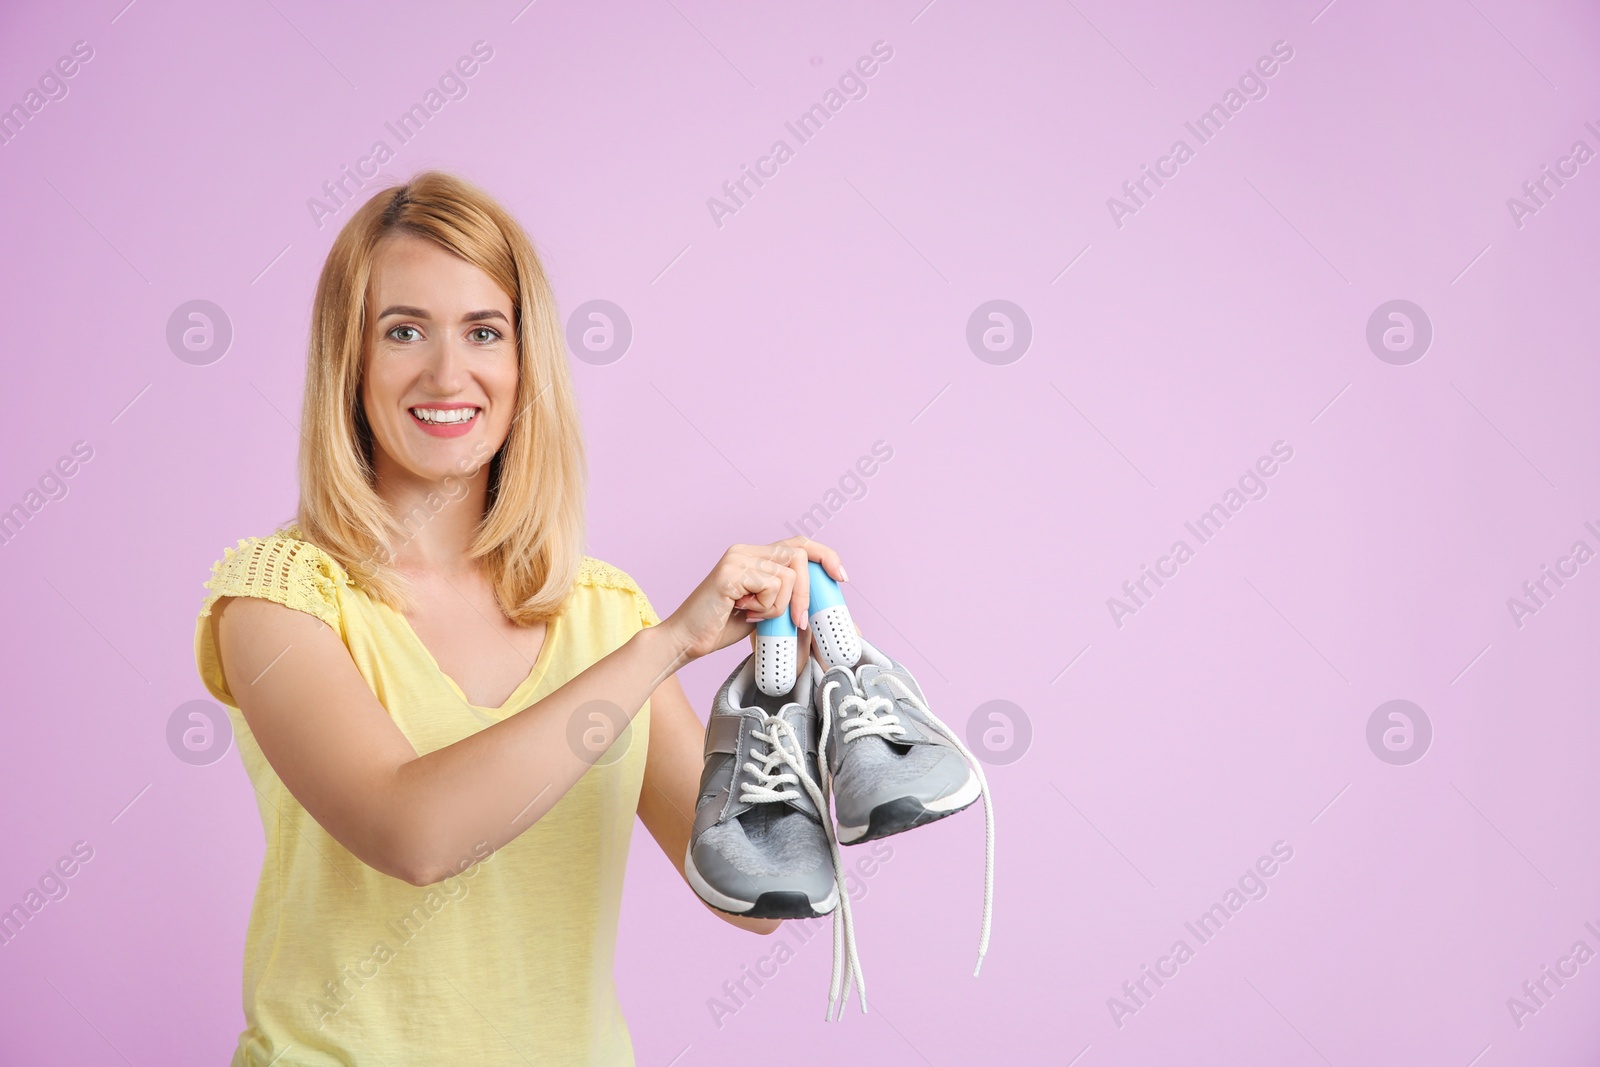 Photo of Young woman putting capsule air fresheners in shoes on color background